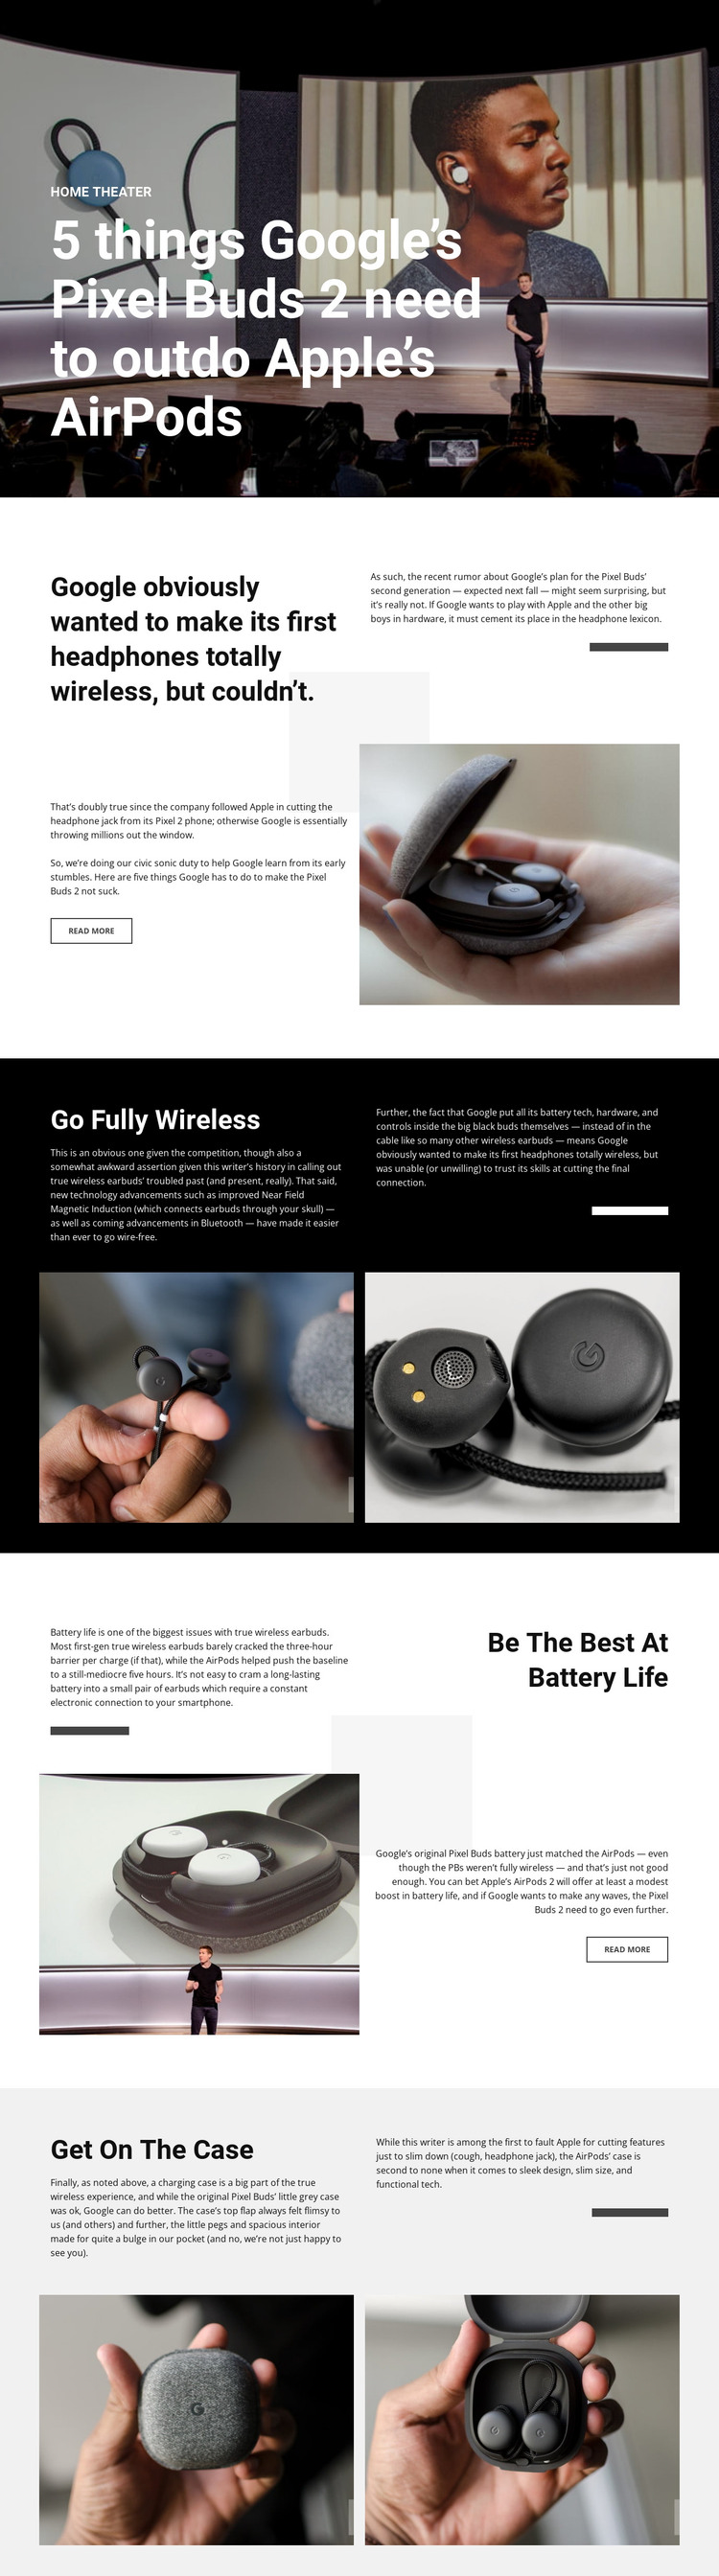 Pixel Buds 2 HTML Template